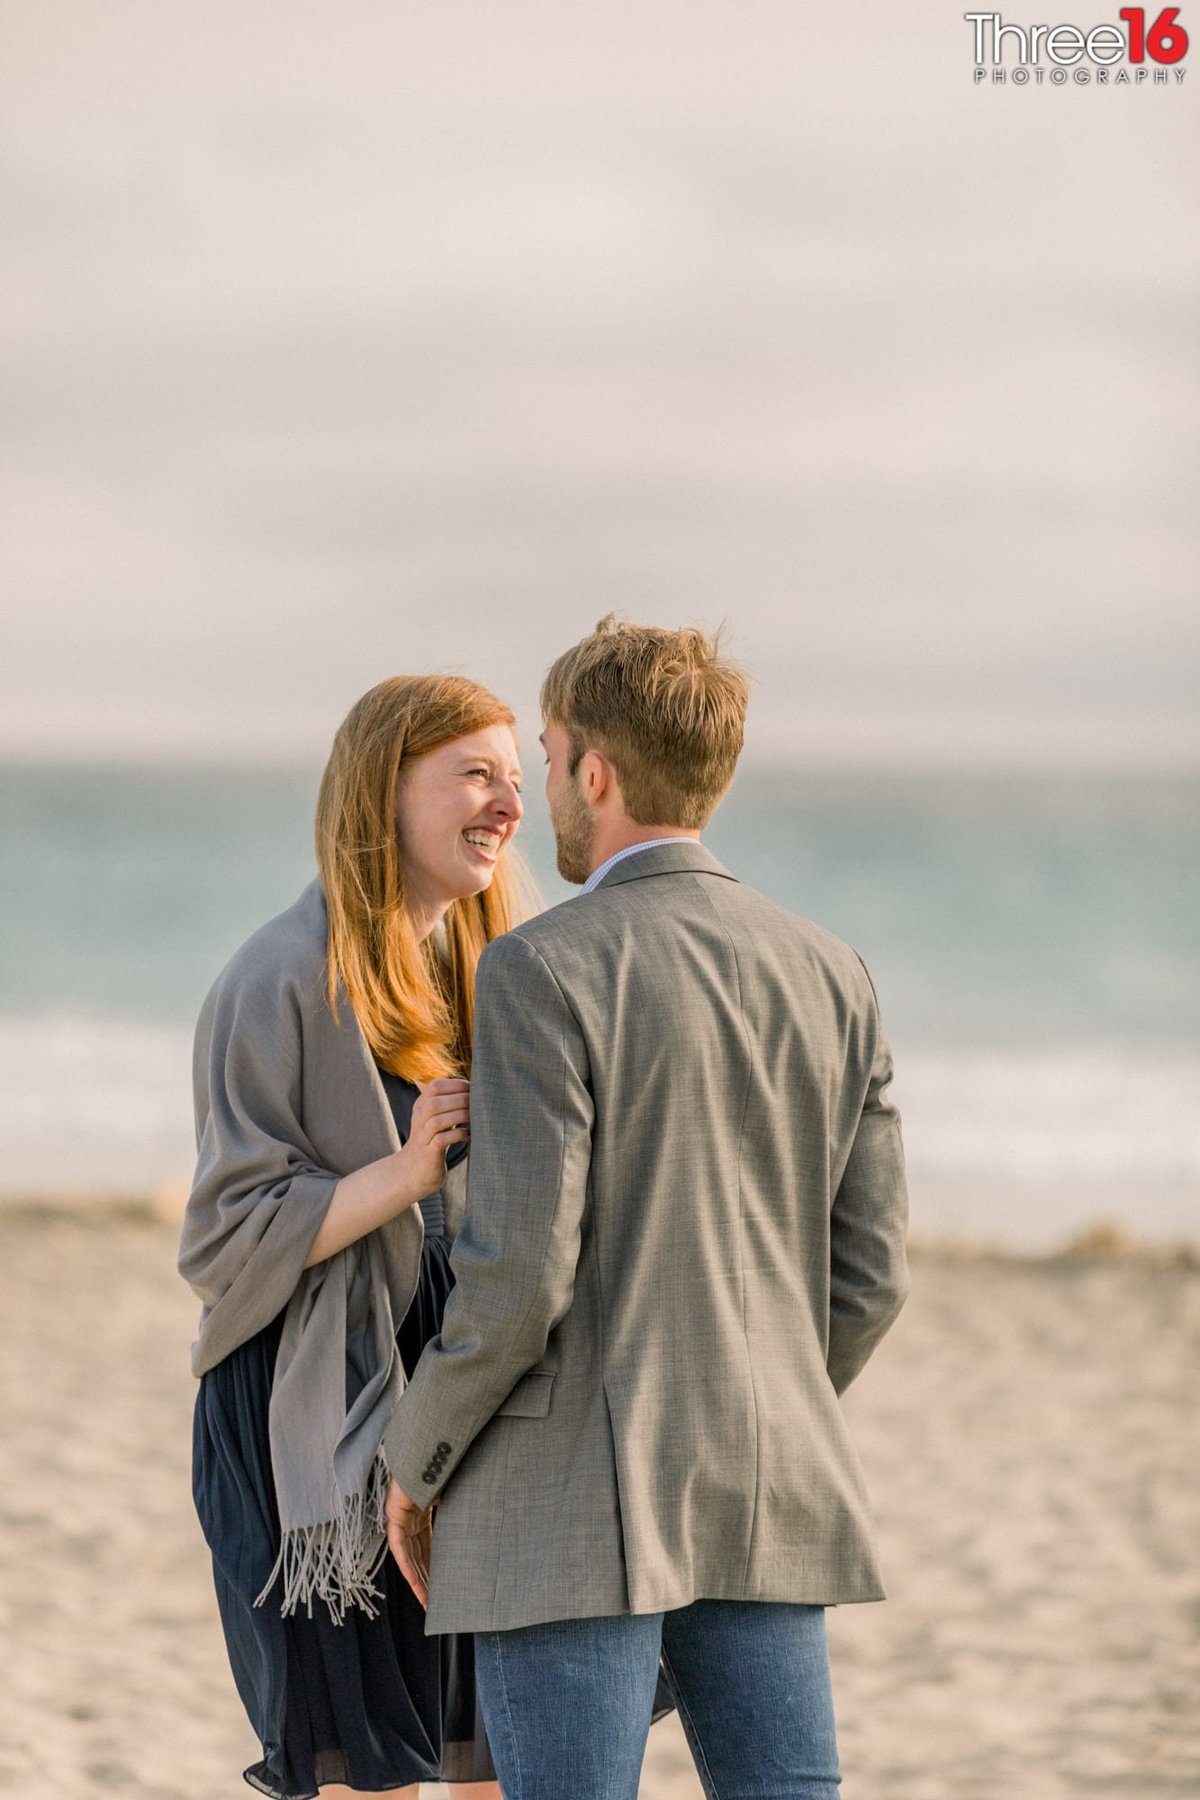 Engaged couple smile together on the beach